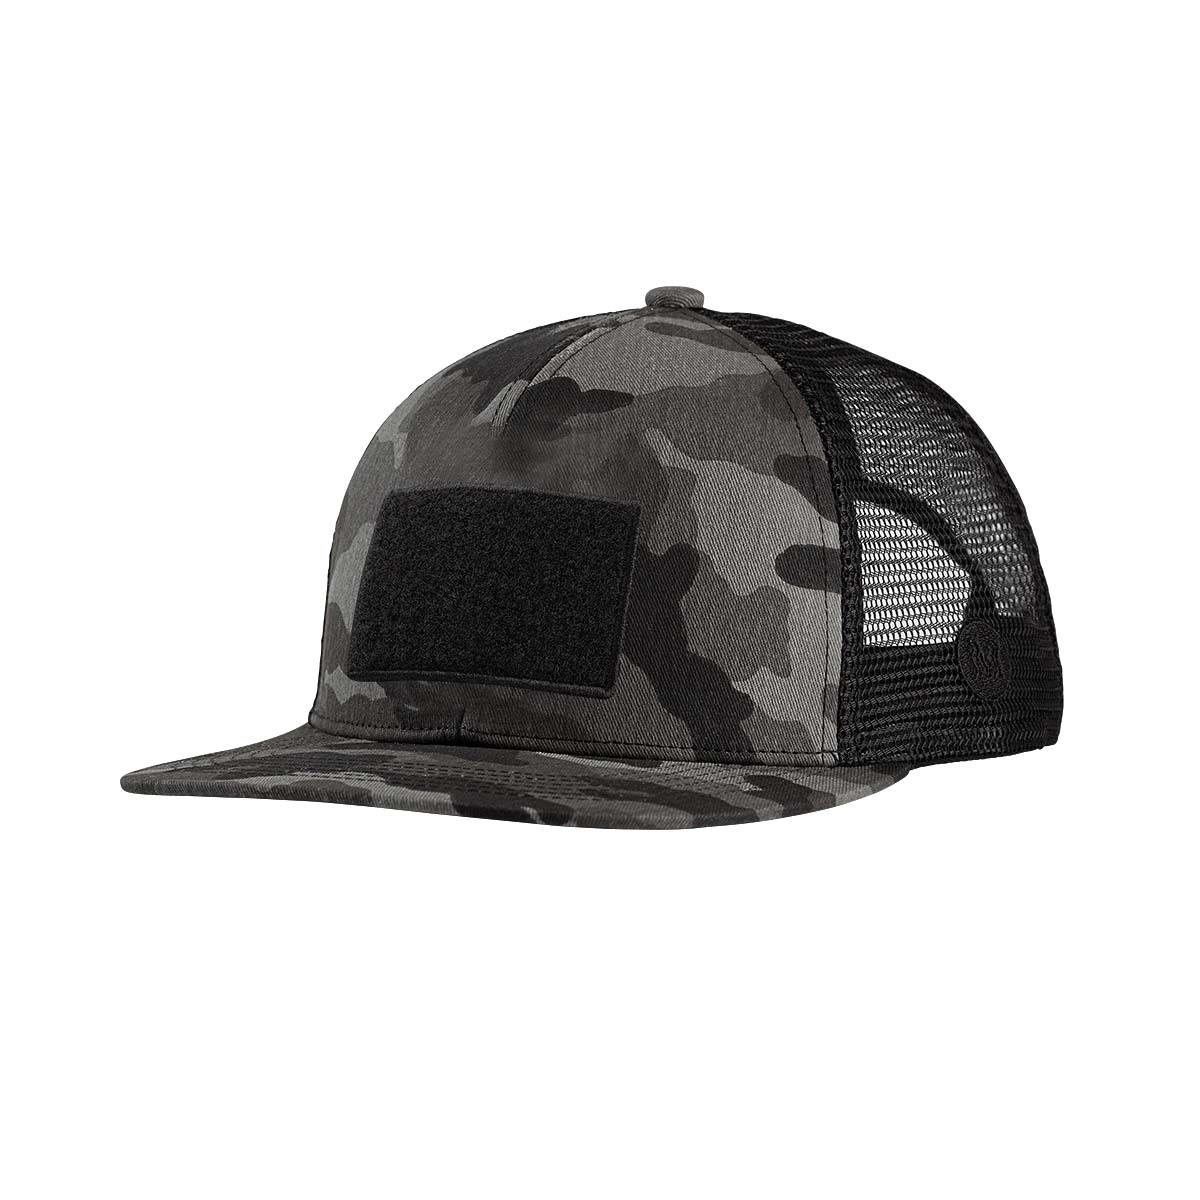 TACTICAL PATCH TRUCKER - NIGHT CAMO